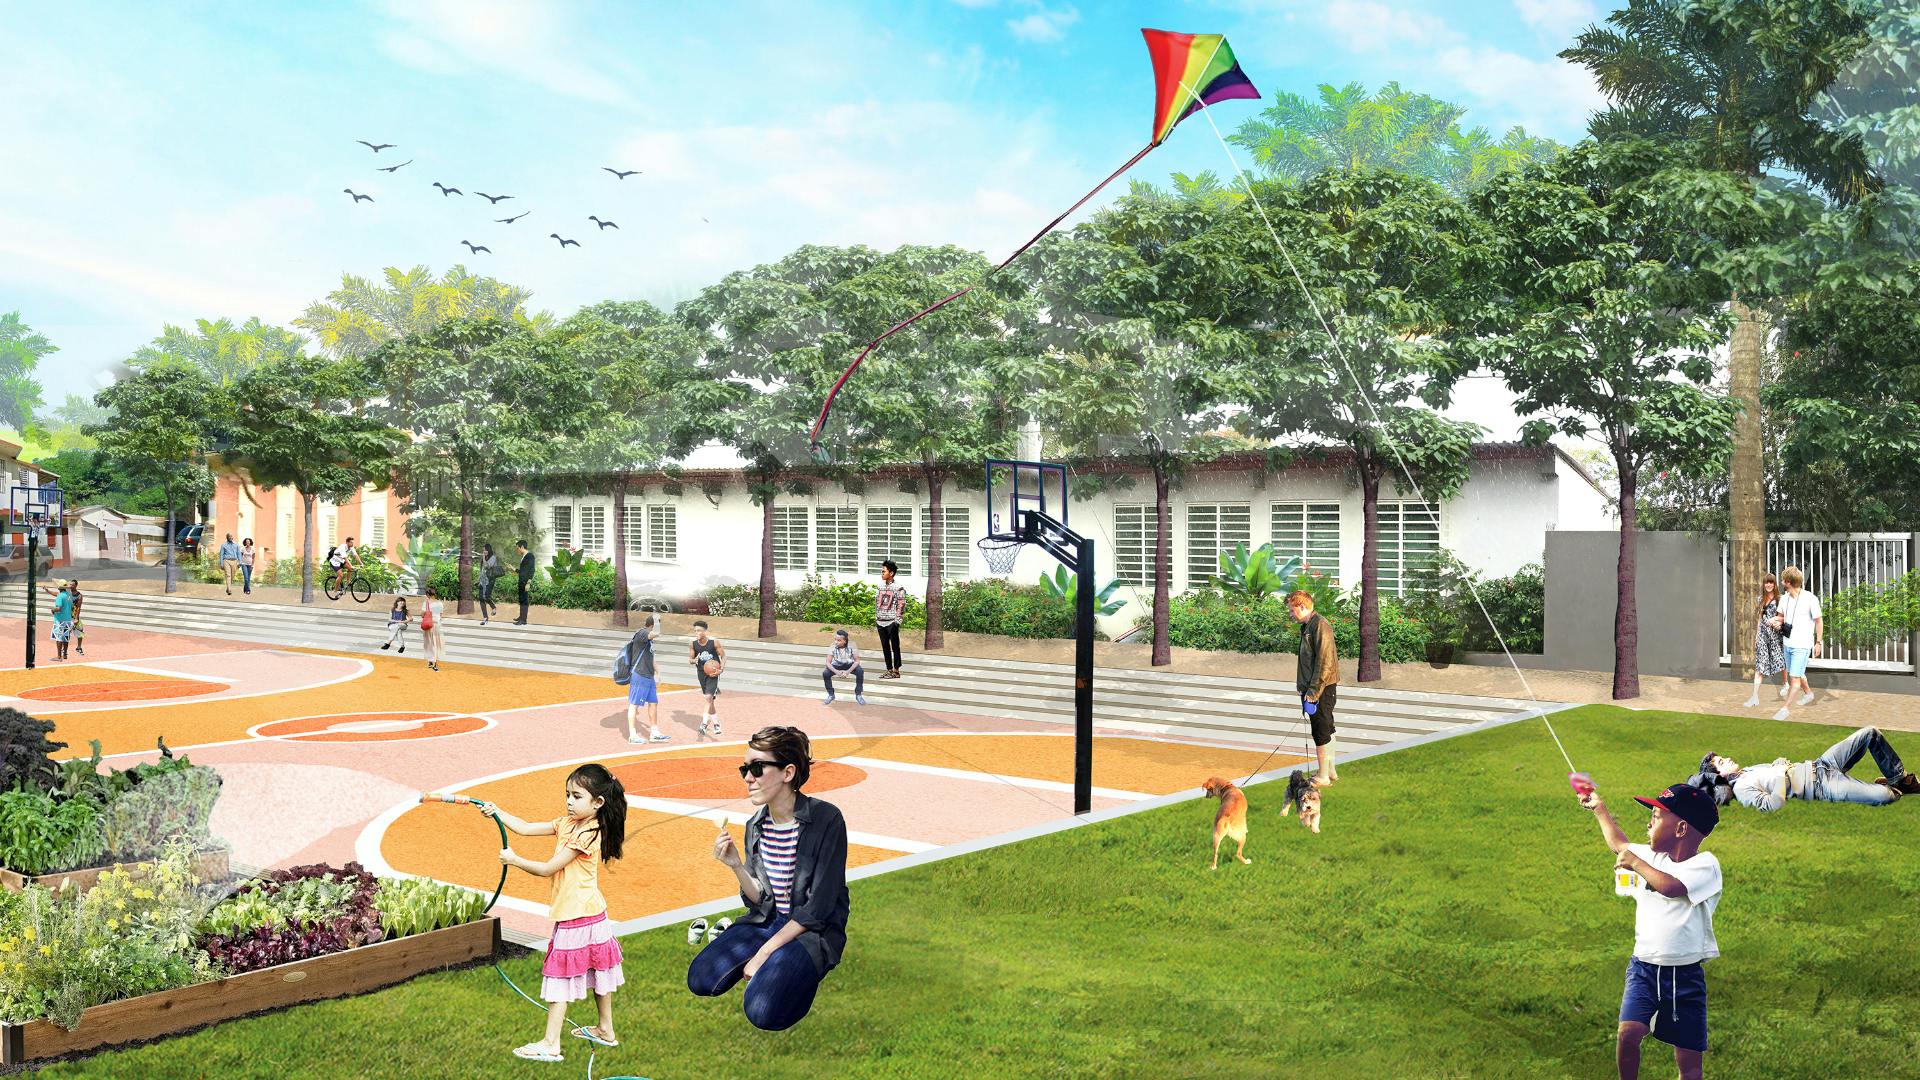 Perspective rendering of sunken basketball court with kids sitting on steps along the side and flying kites.